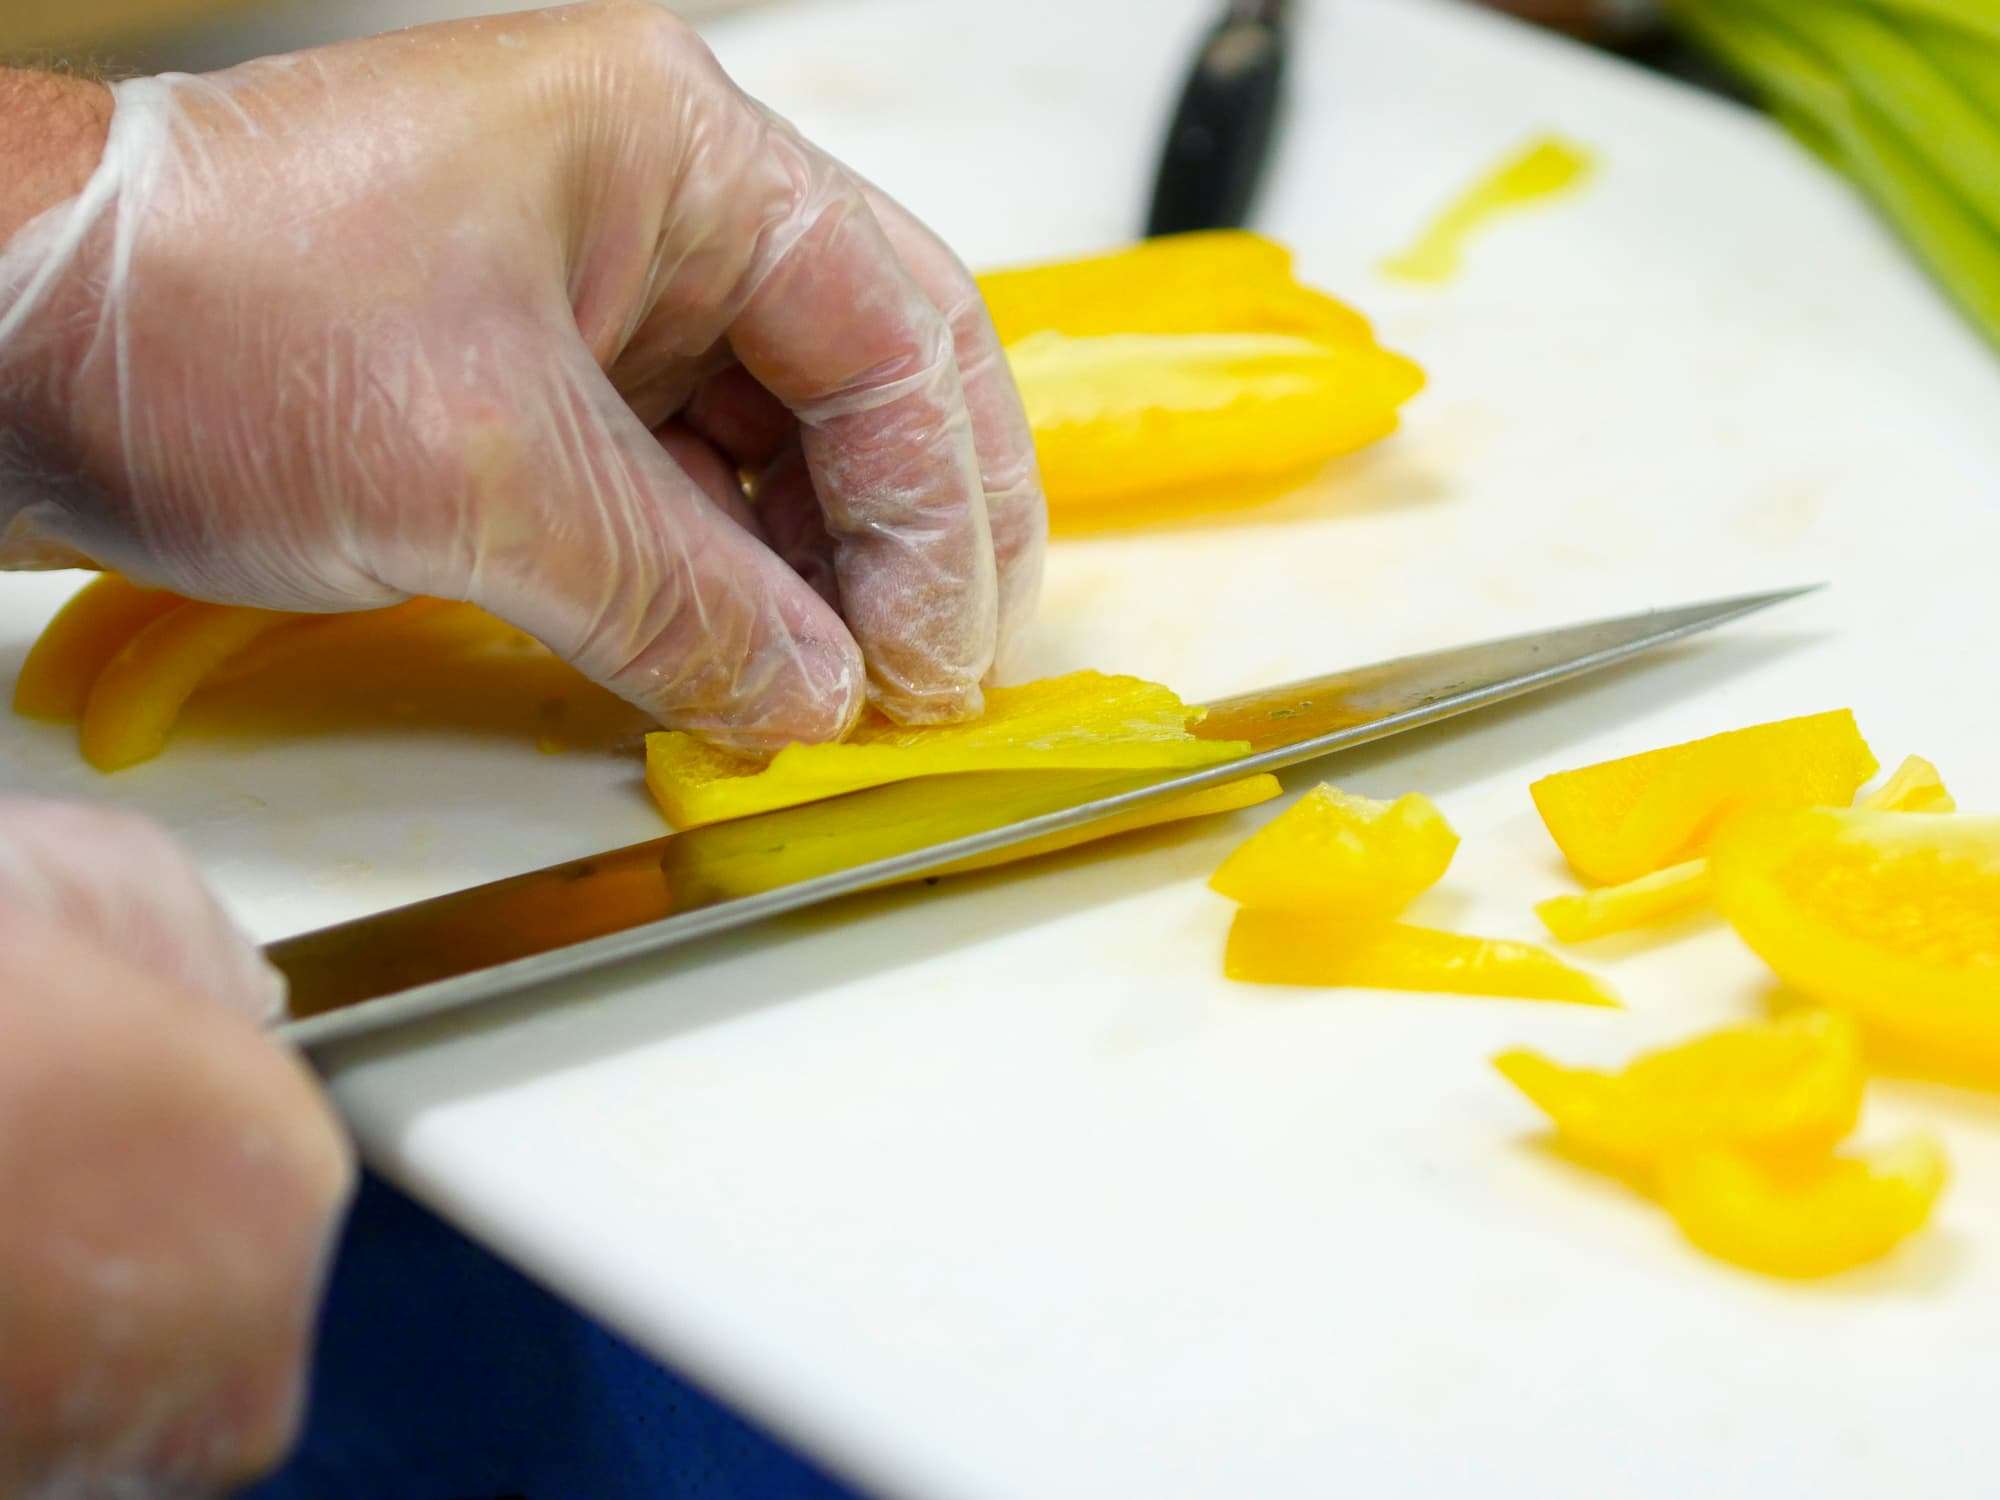 A close-up of a student slicing a yellow pepper into razor-thin pieces.